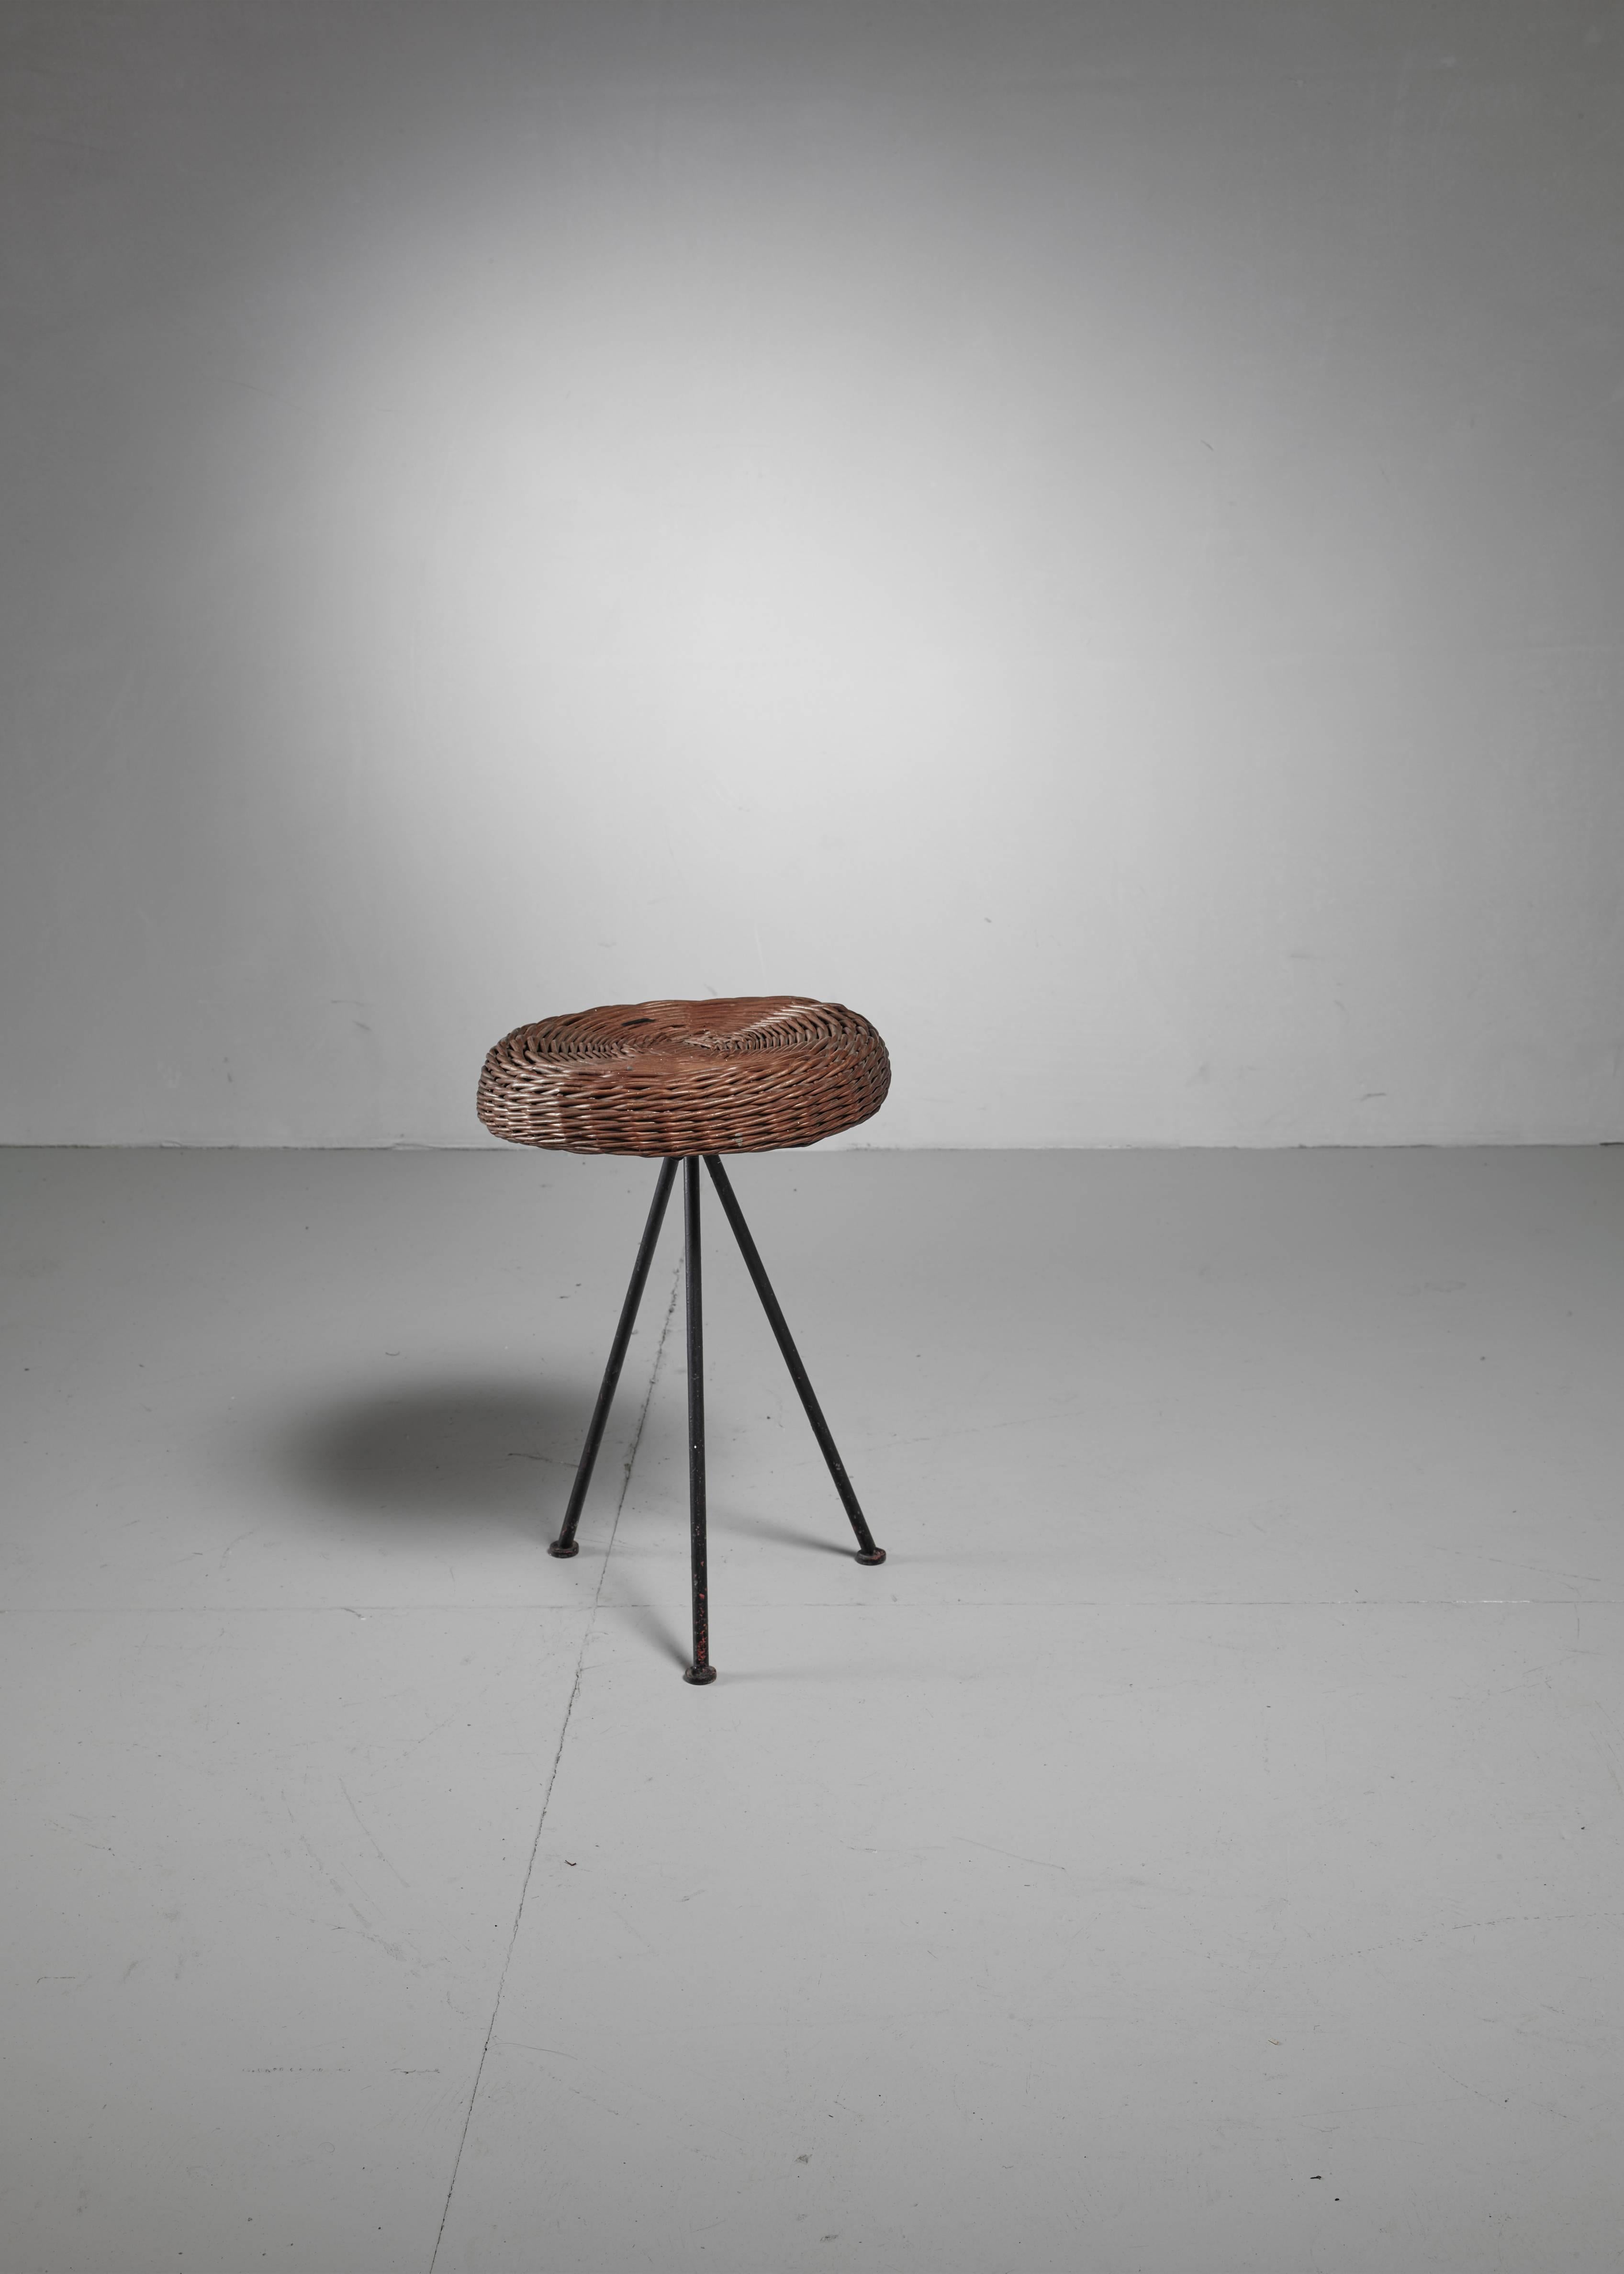 Mid-Century Modern Norman Cherner Iron with Rattan Stool for Konwiser, USA, 1950s